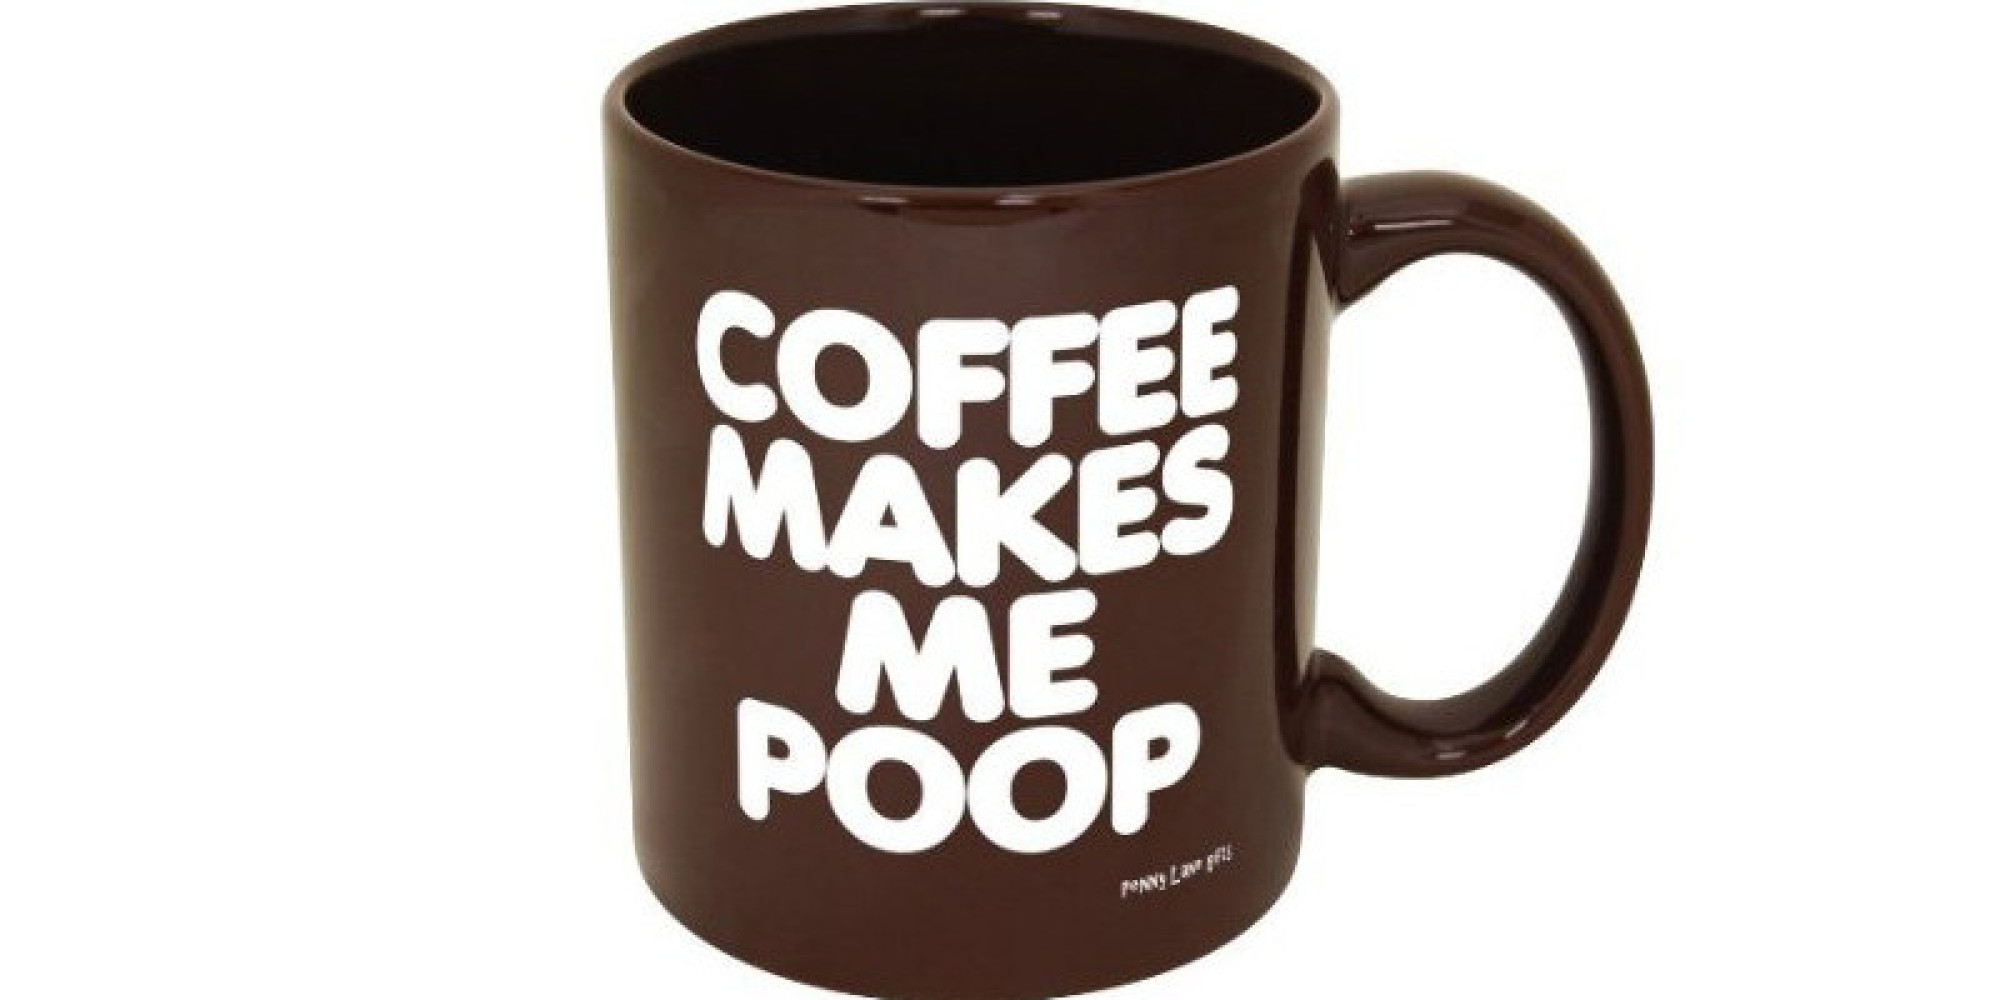 Download 10 Mugs That Make Us Hate Coffee Drinkers (PHOTOS) | HuffPost